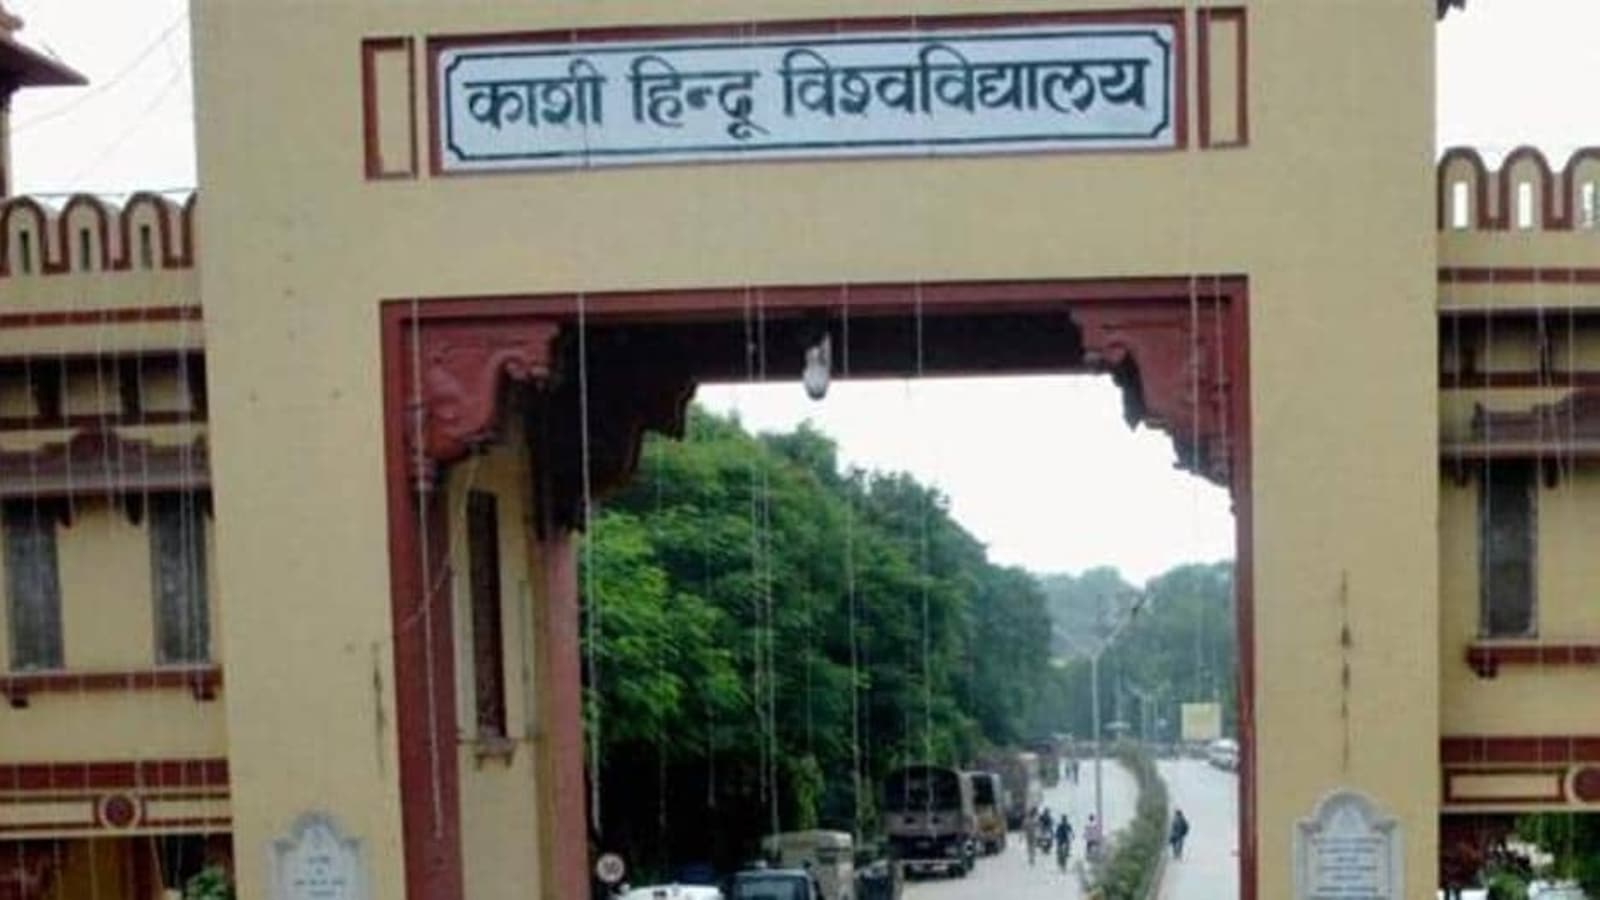 BHU Admission 2022: Last date to apply for UG courses through CUET